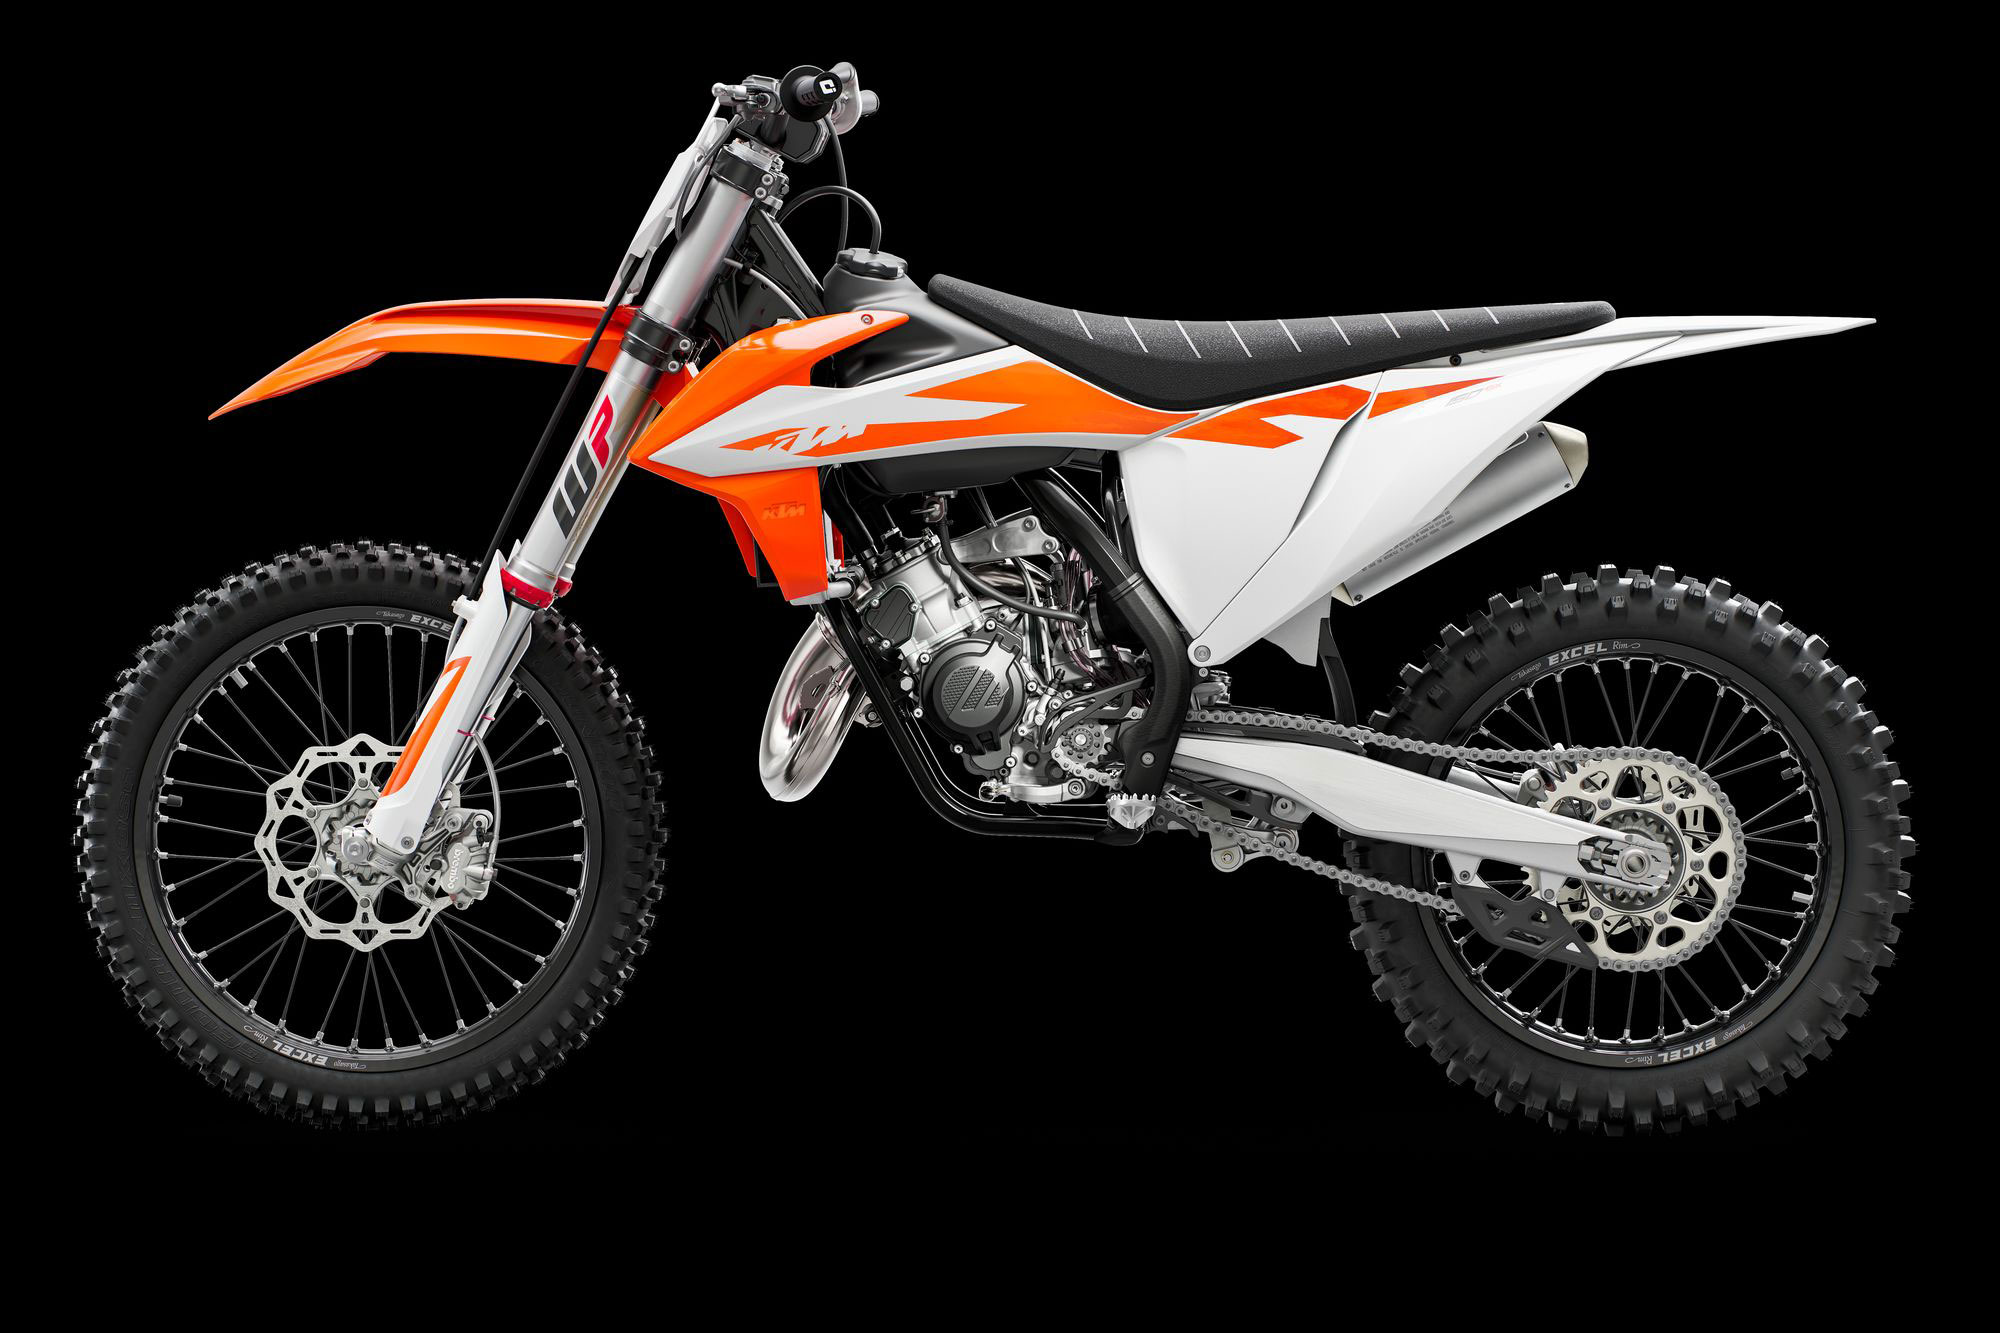 2020 KTM 150 SX Guide • Total Motorcycle